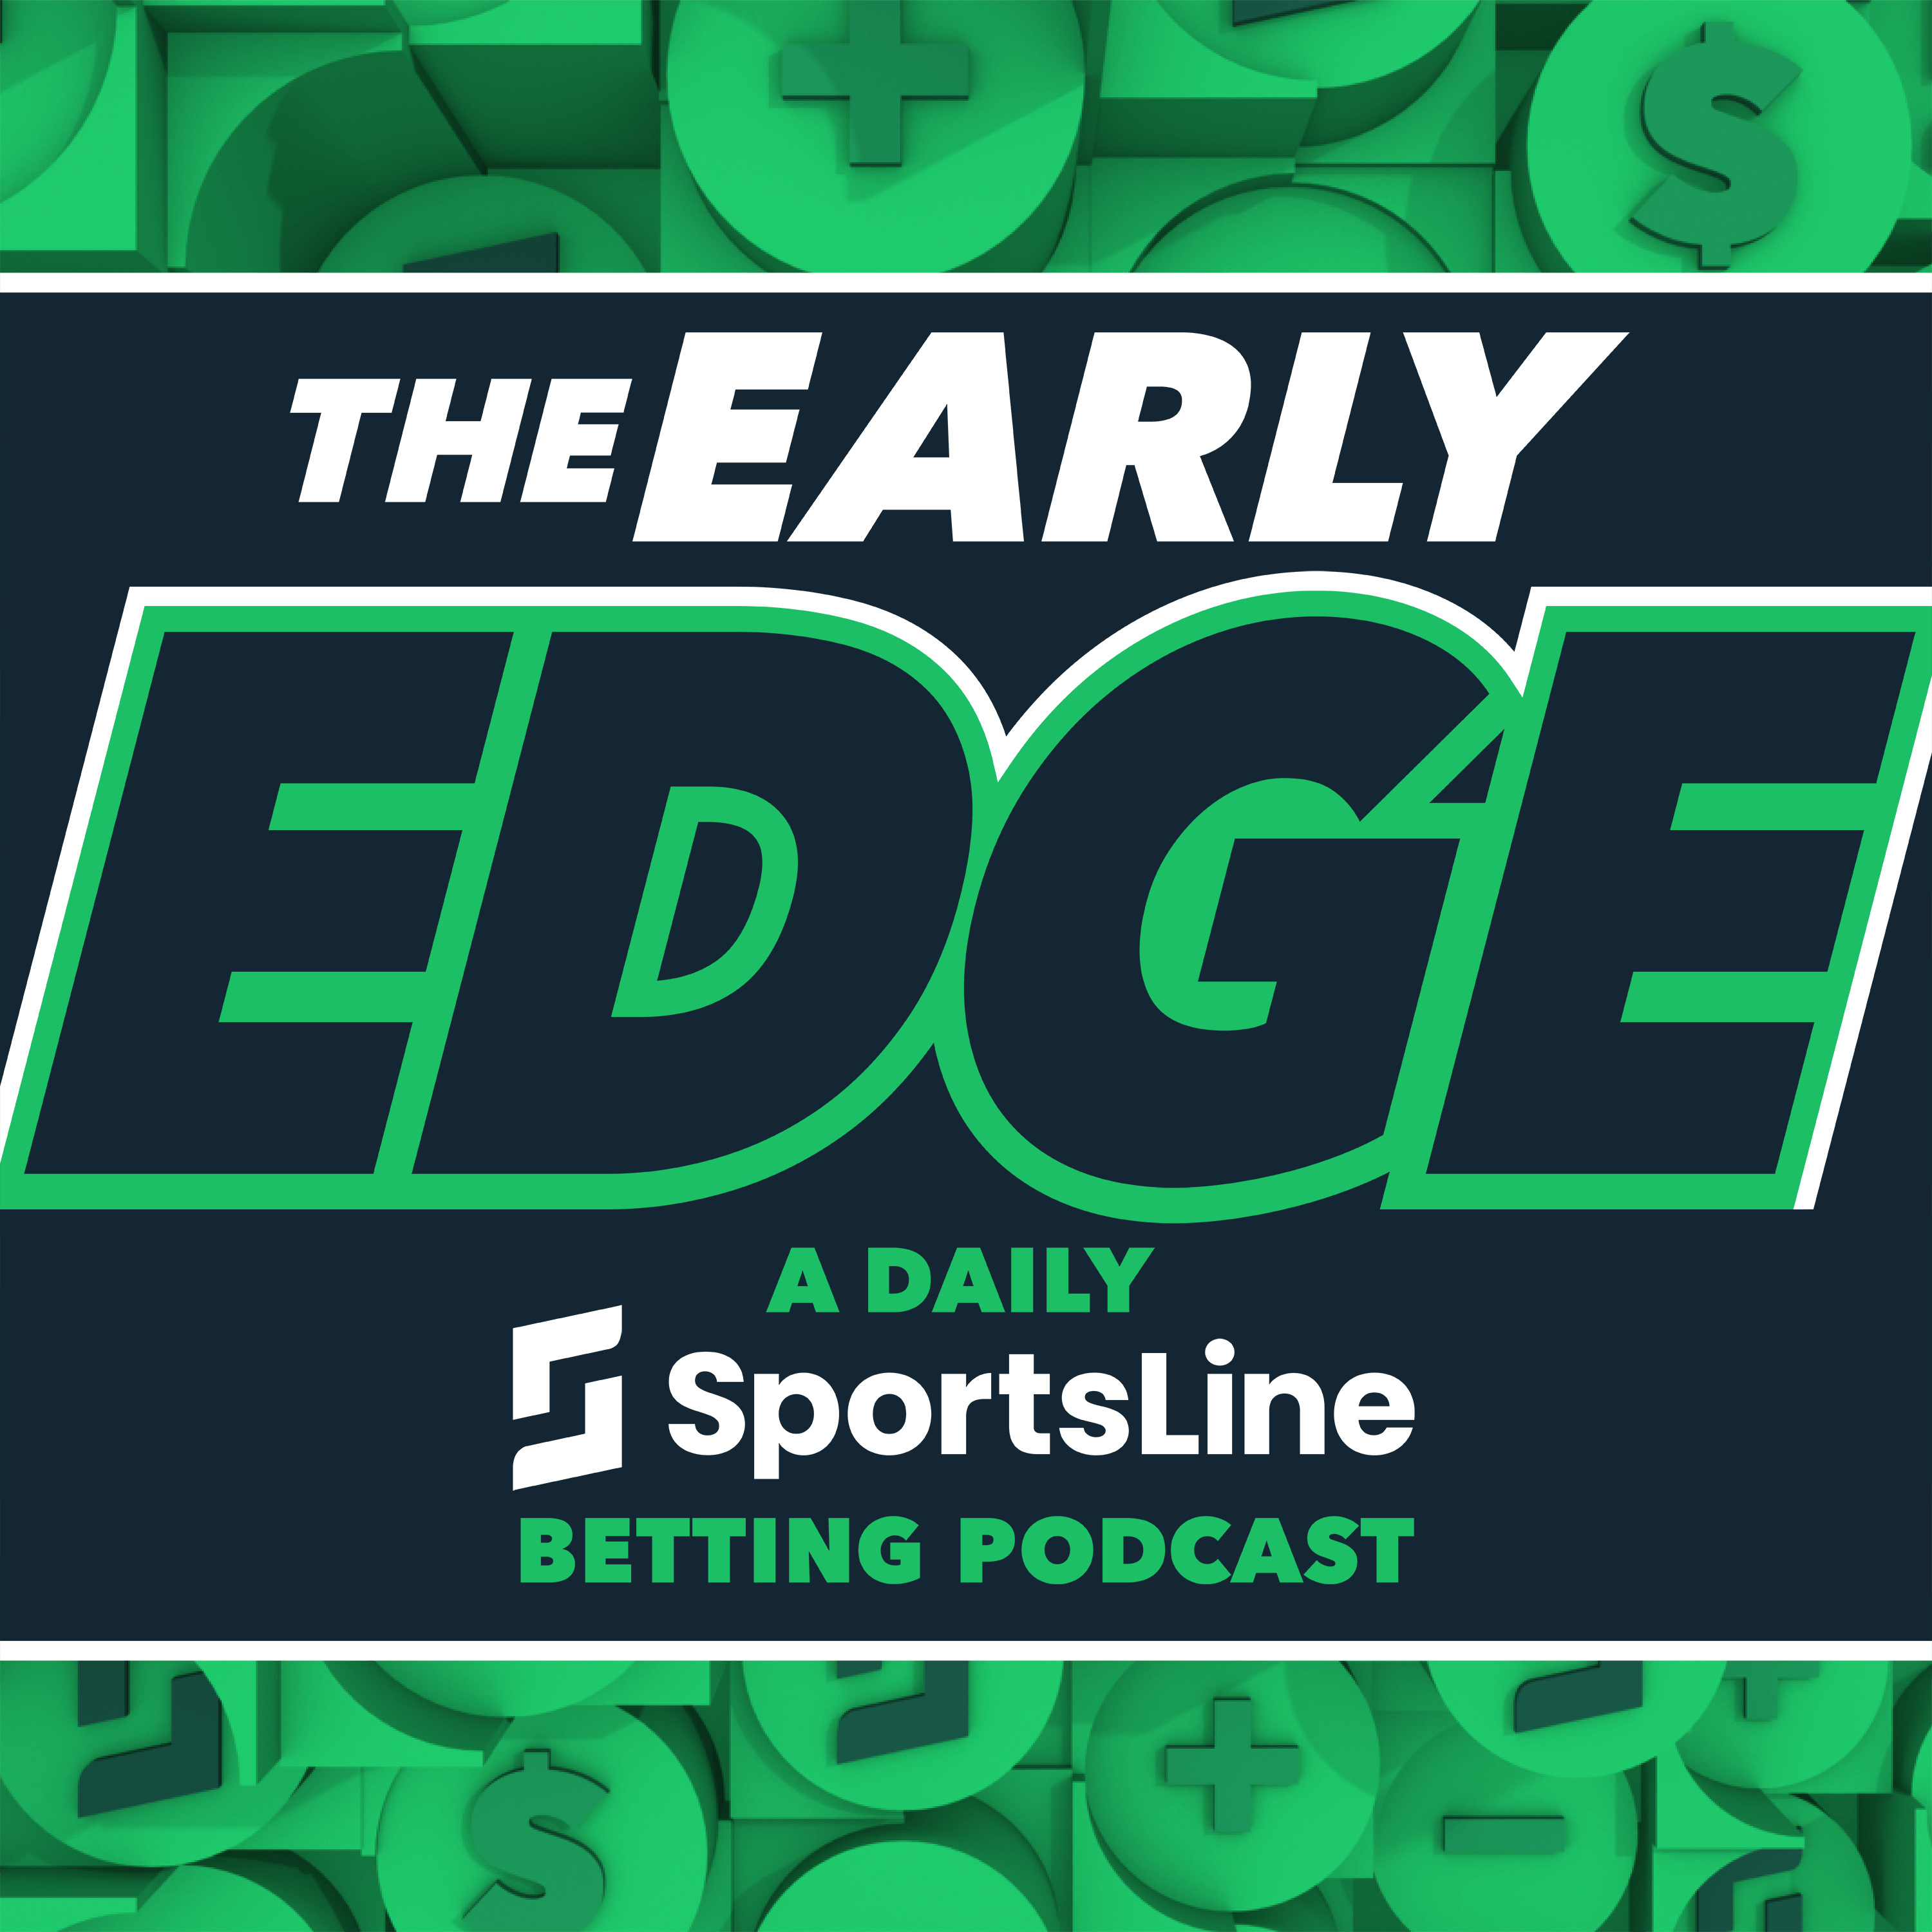 Tuesday's BEST BETS: NBA Playoff Picks and Prop + MLB Bets More! | The Early Edge